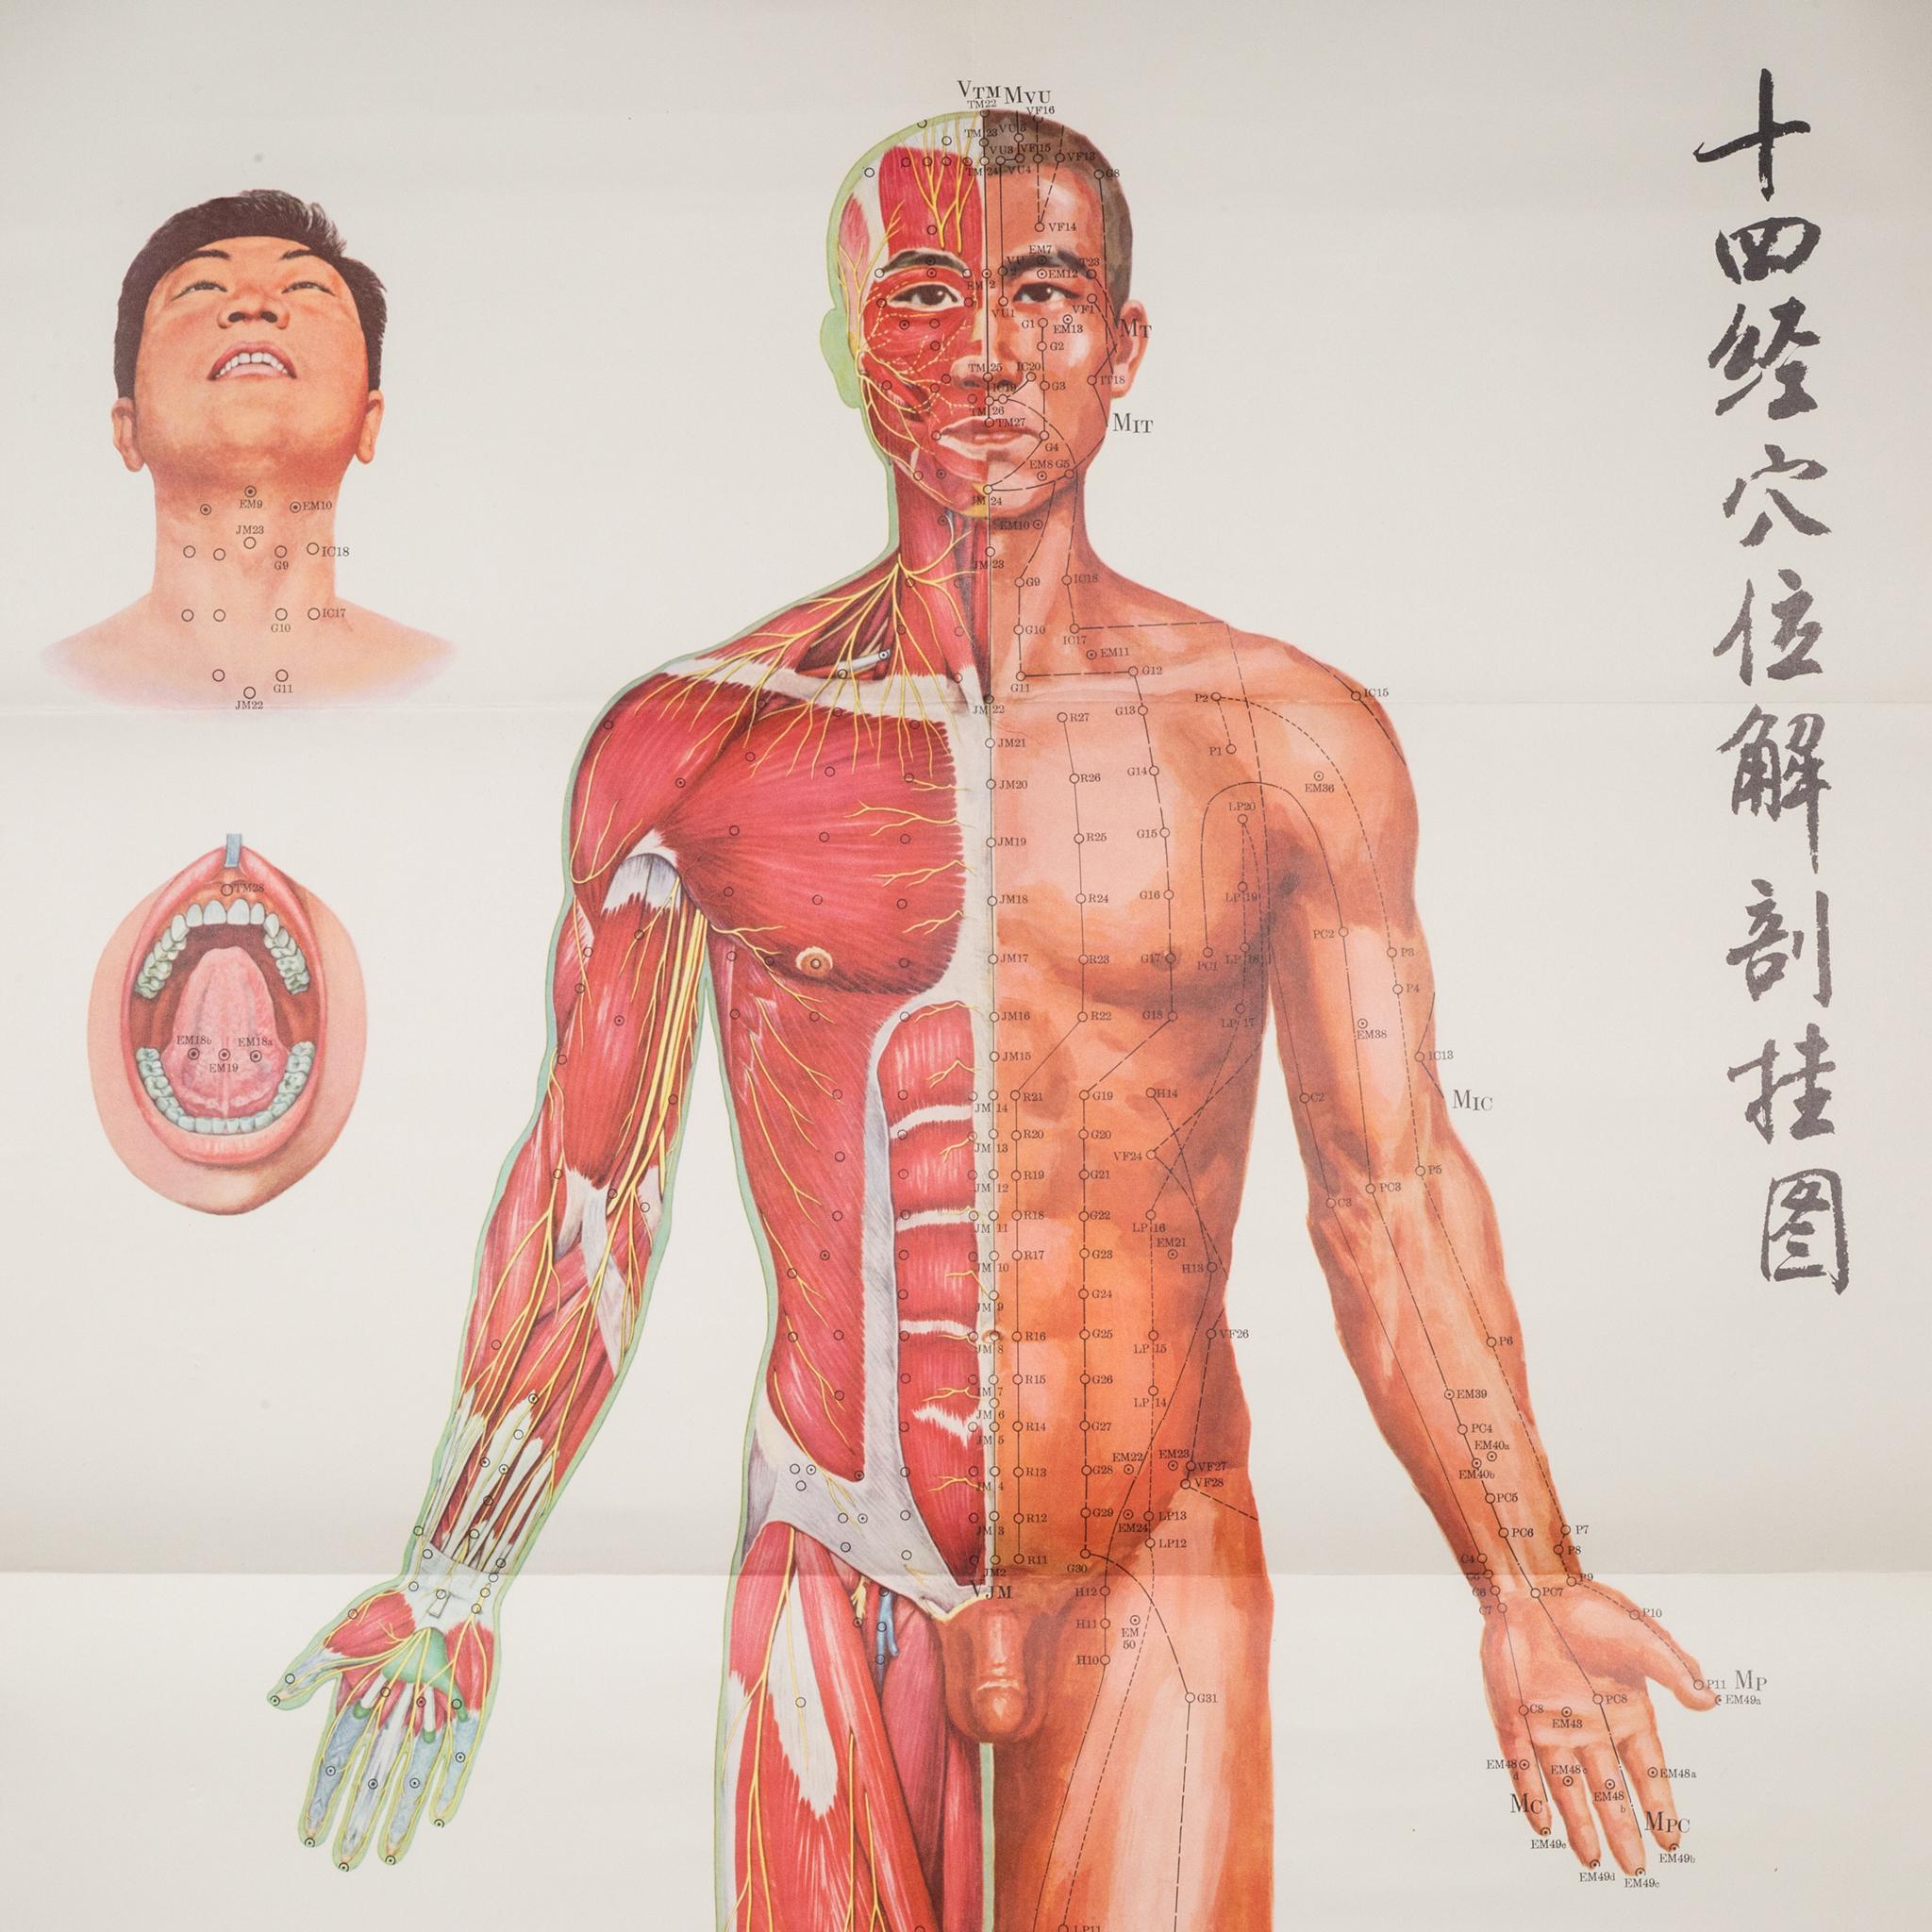 vintage acupuncture posters